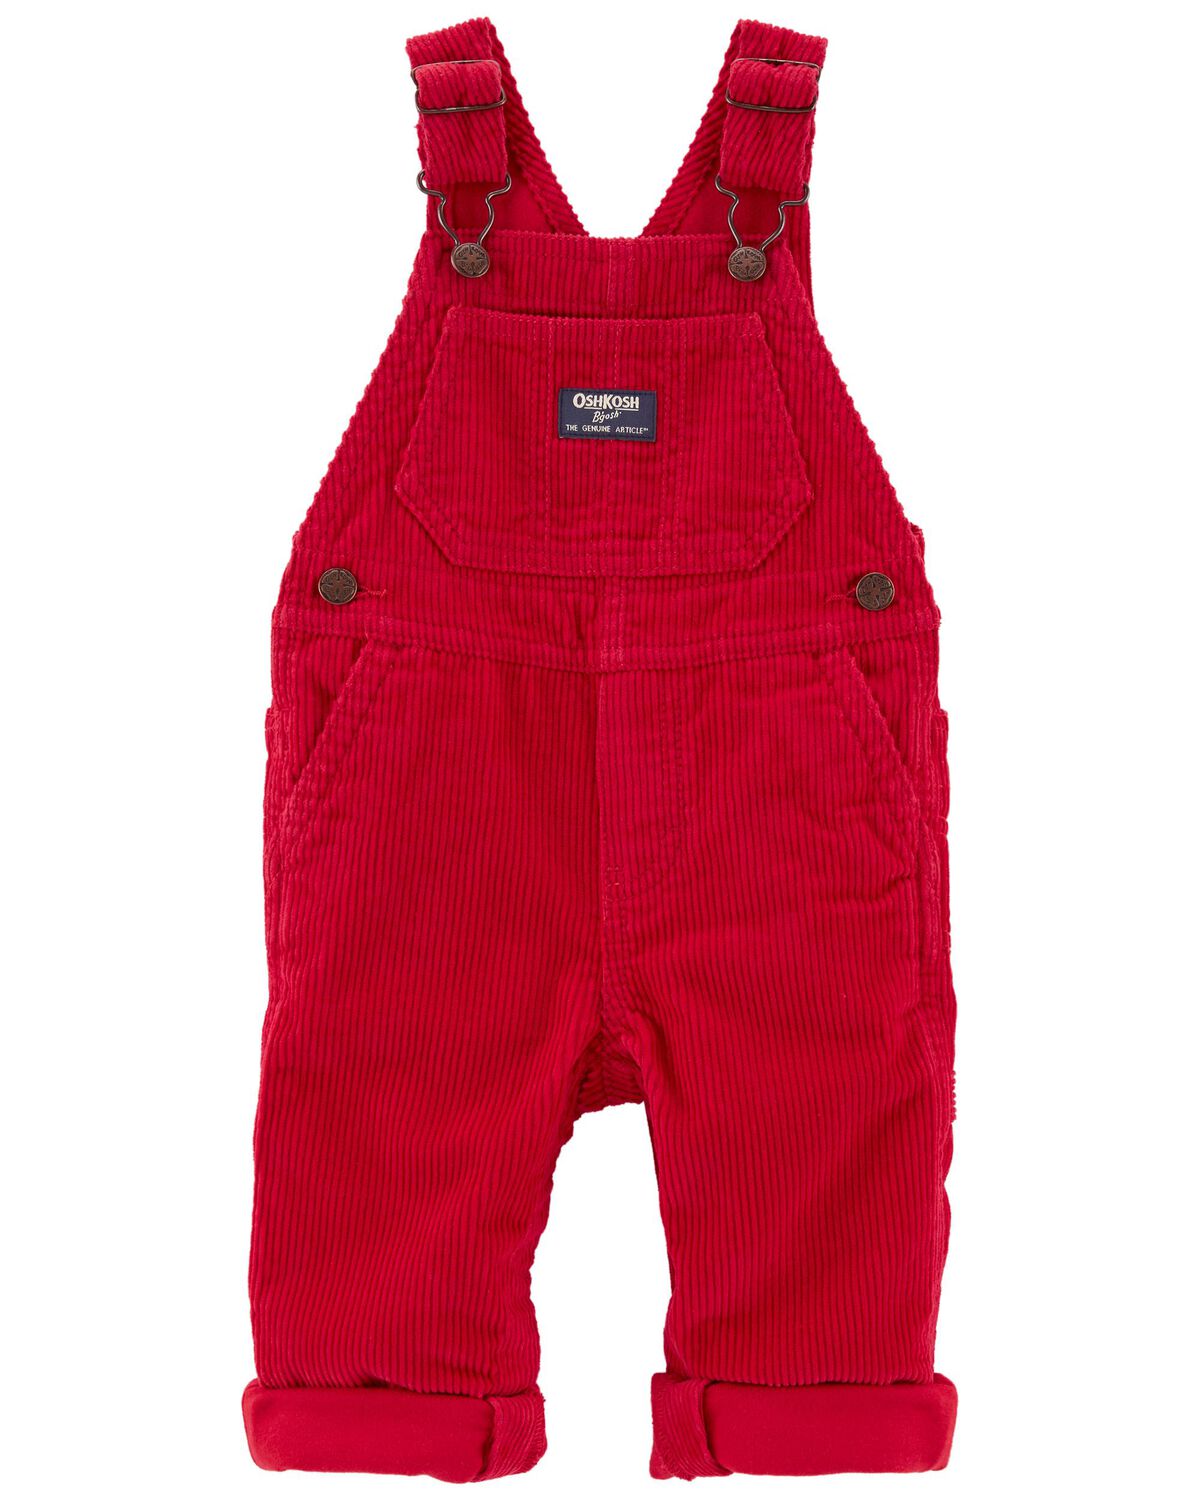 Red Baby Jersey Lined Corduroy Overalls | carters.com